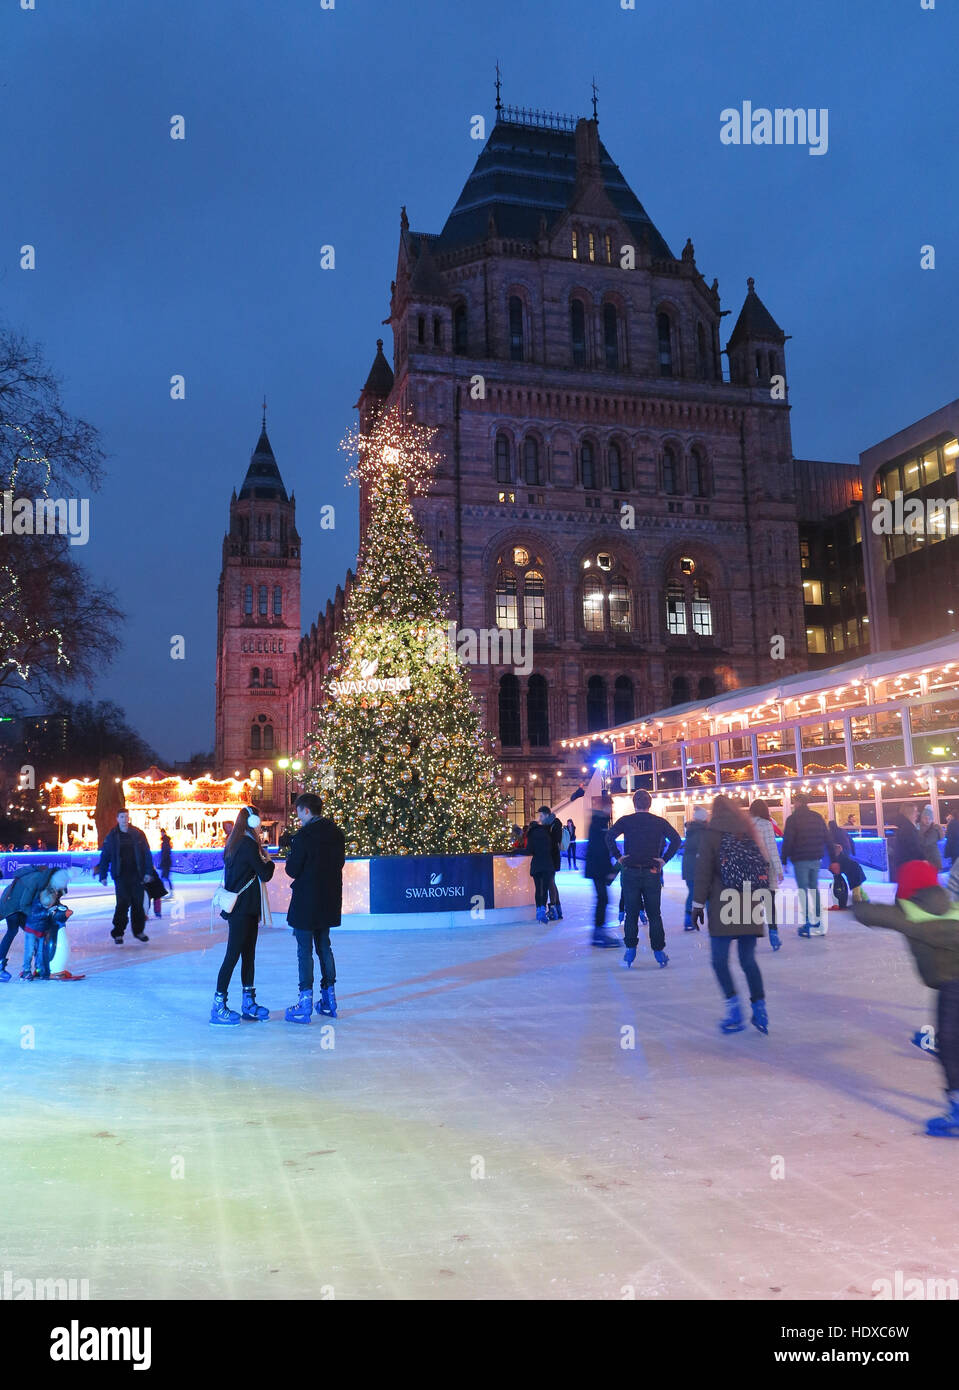 Skaters on ice rink in front of the Natural History Museum at Christmas time. Stock Photo